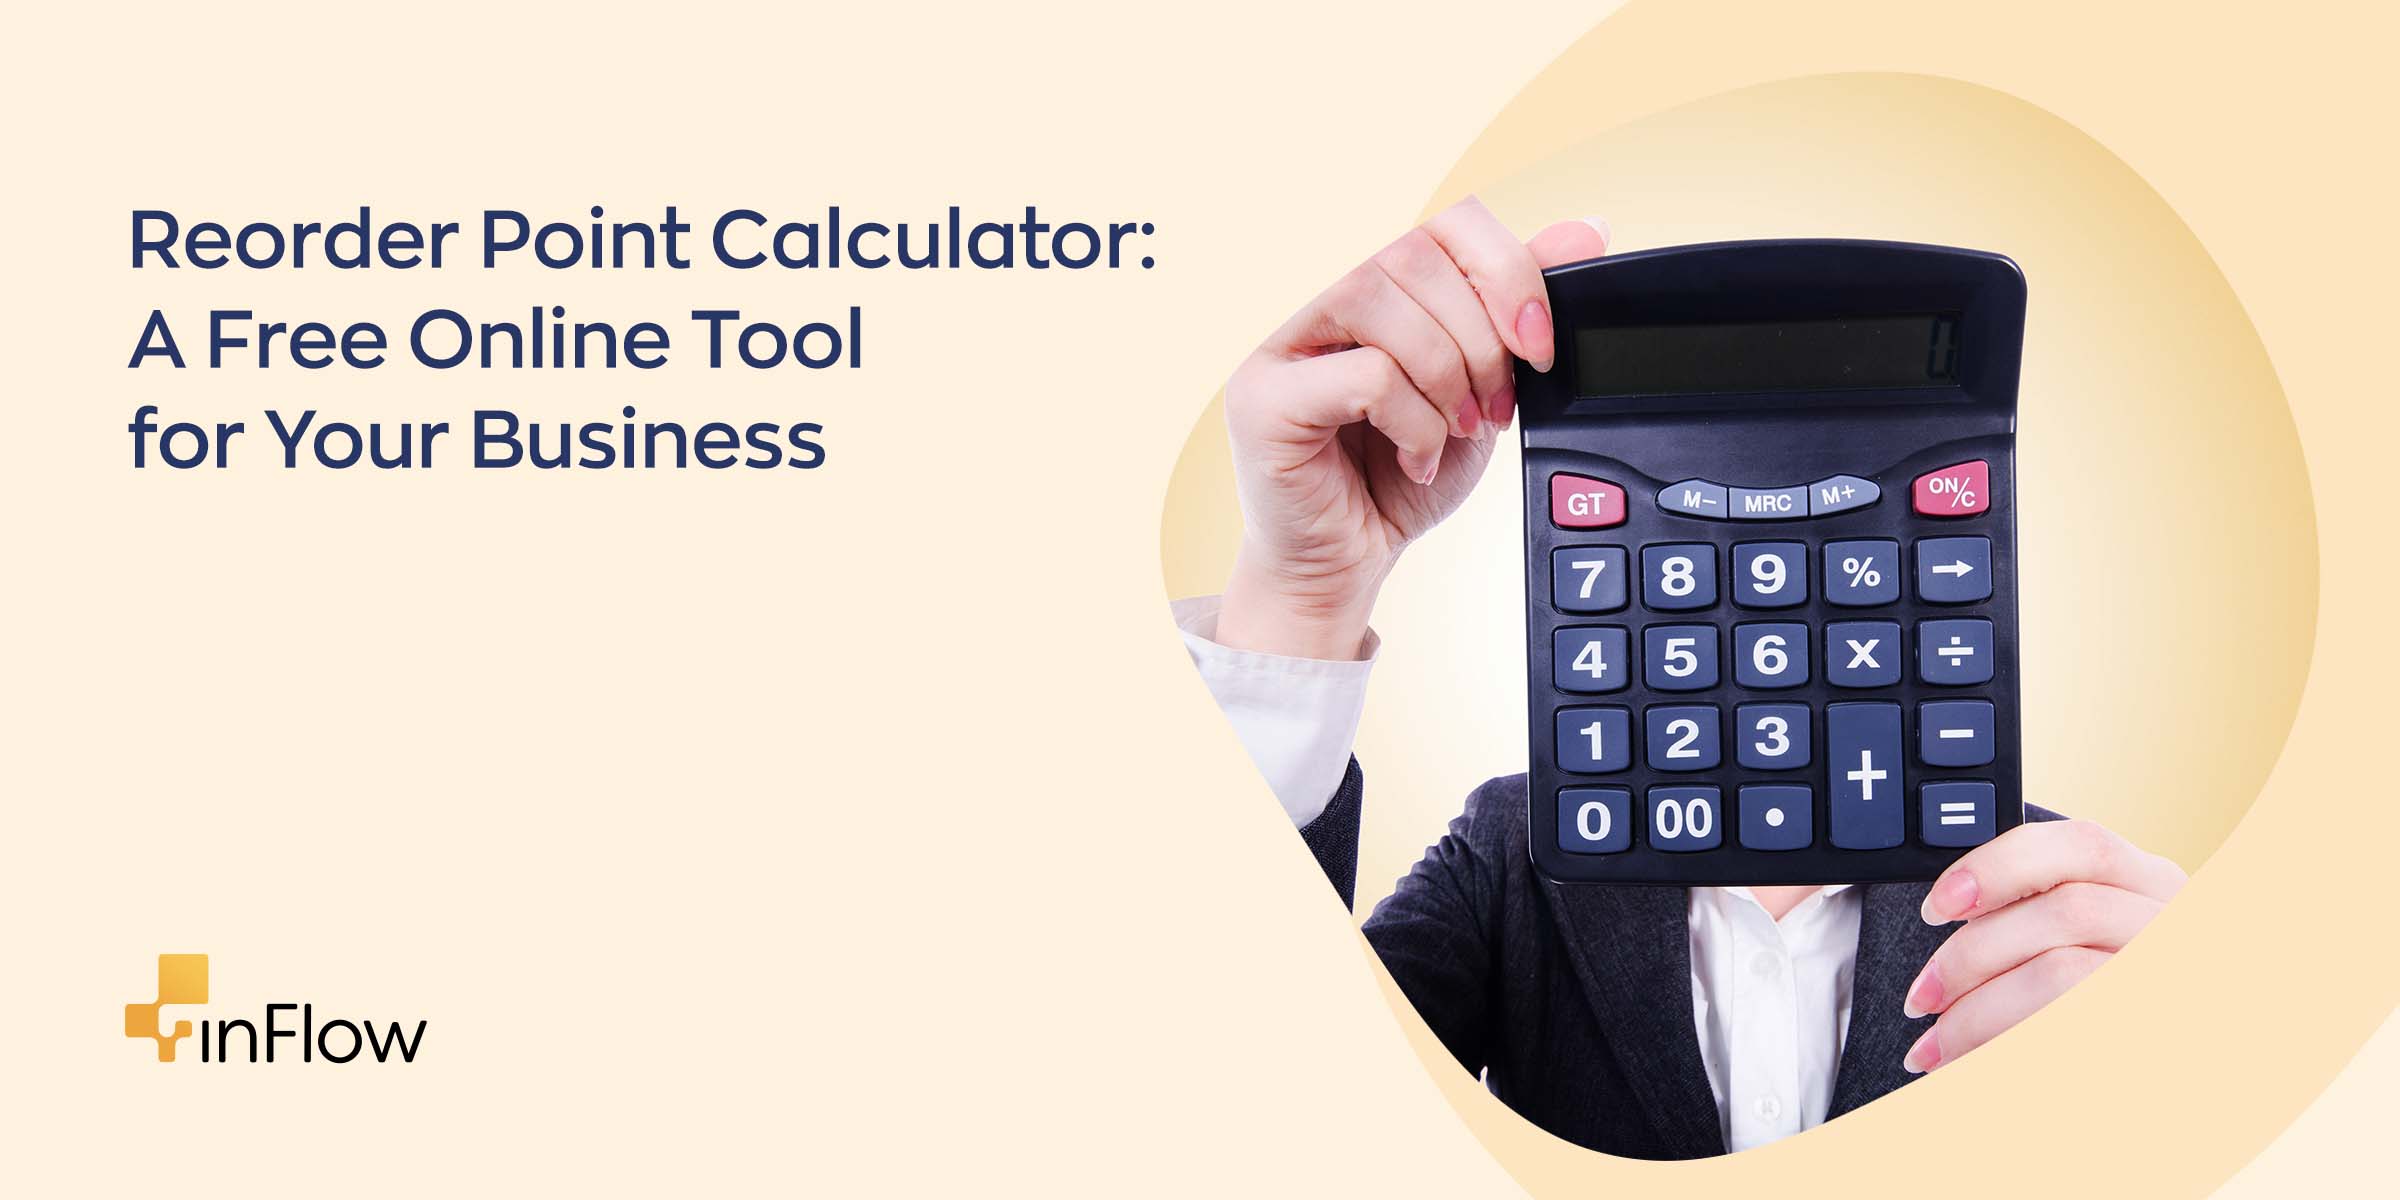 Reorder Point Calculator: A Free Online Tool for Your Business